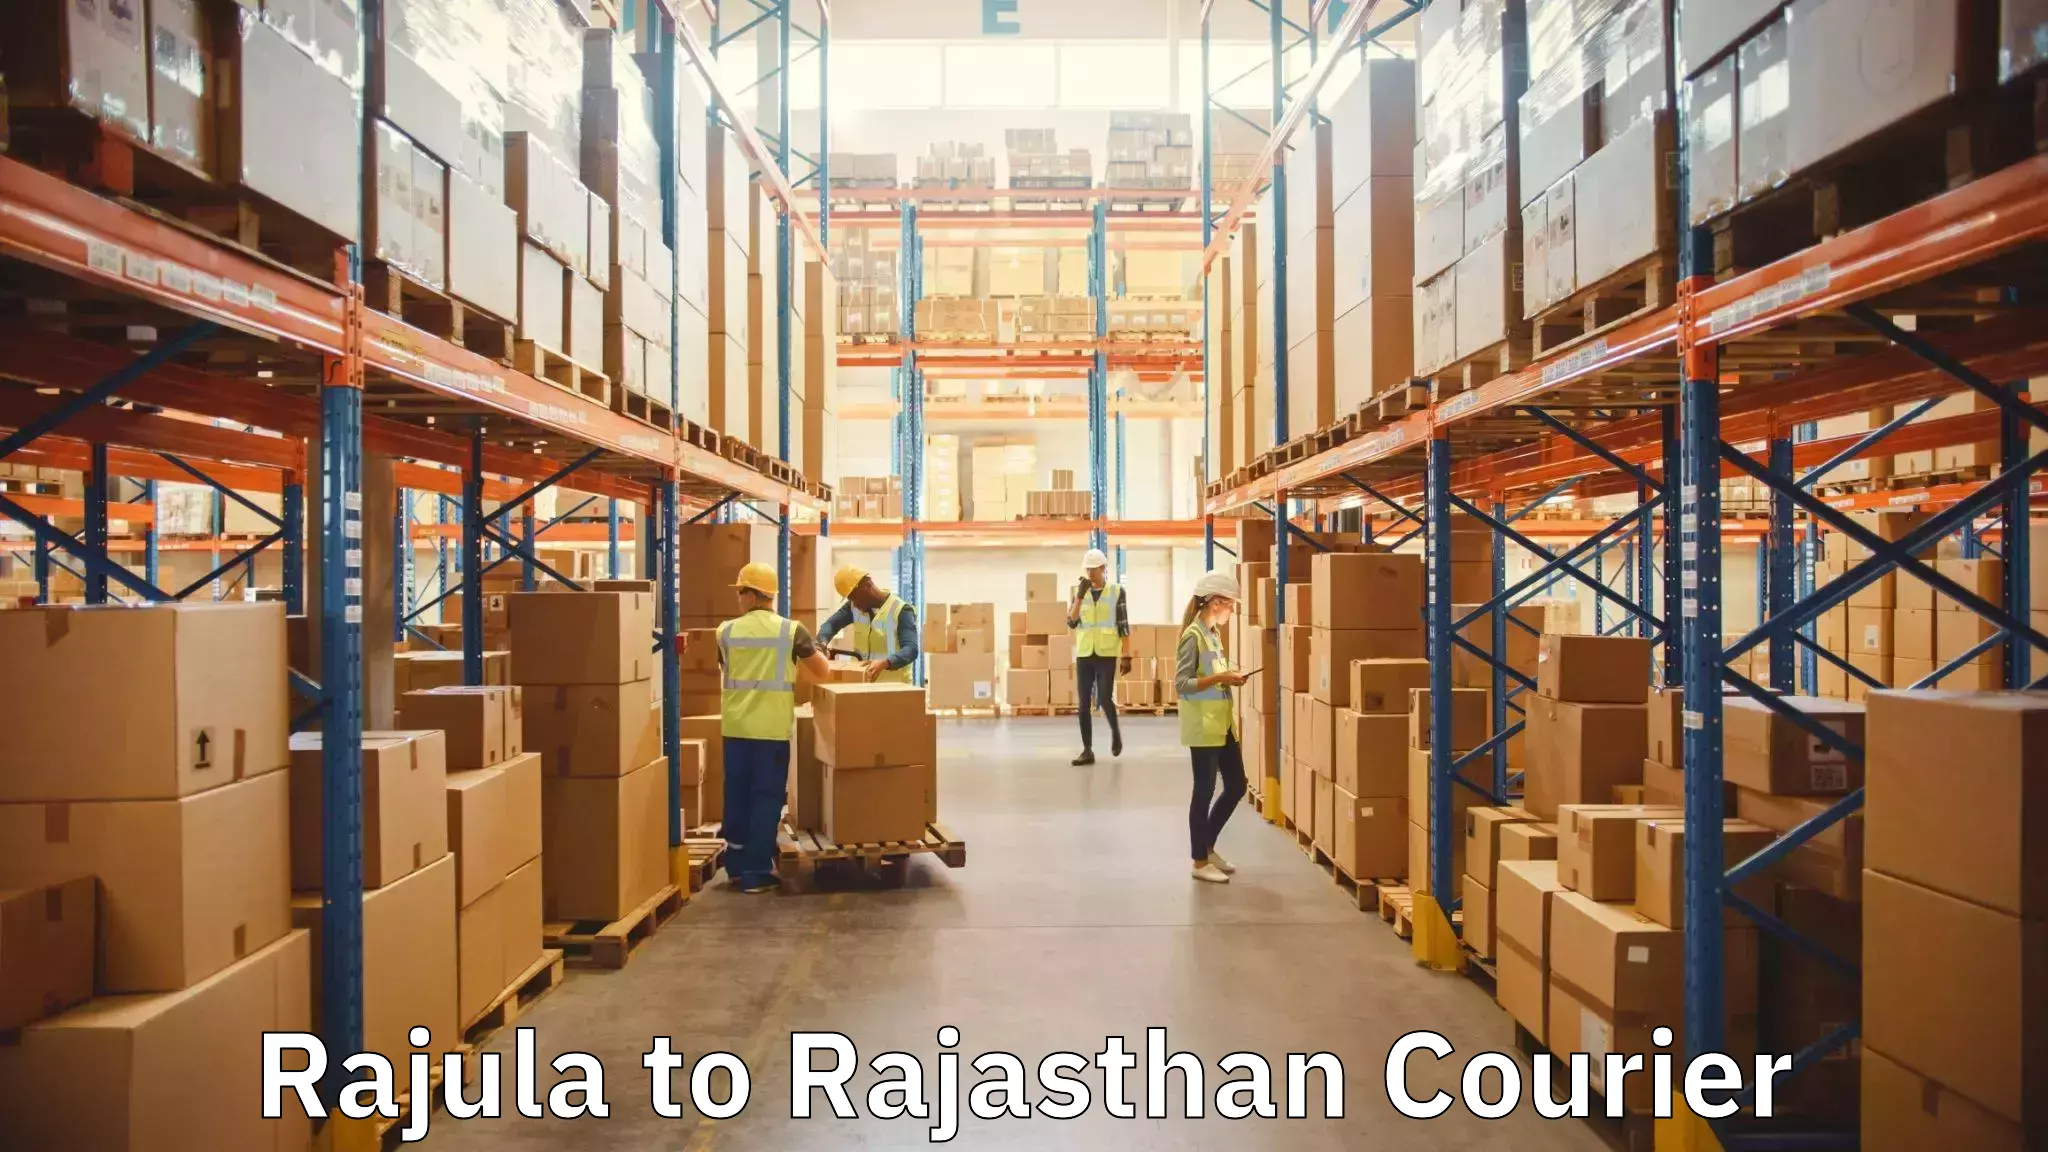 Specialized moving company Rajula to Udaipur